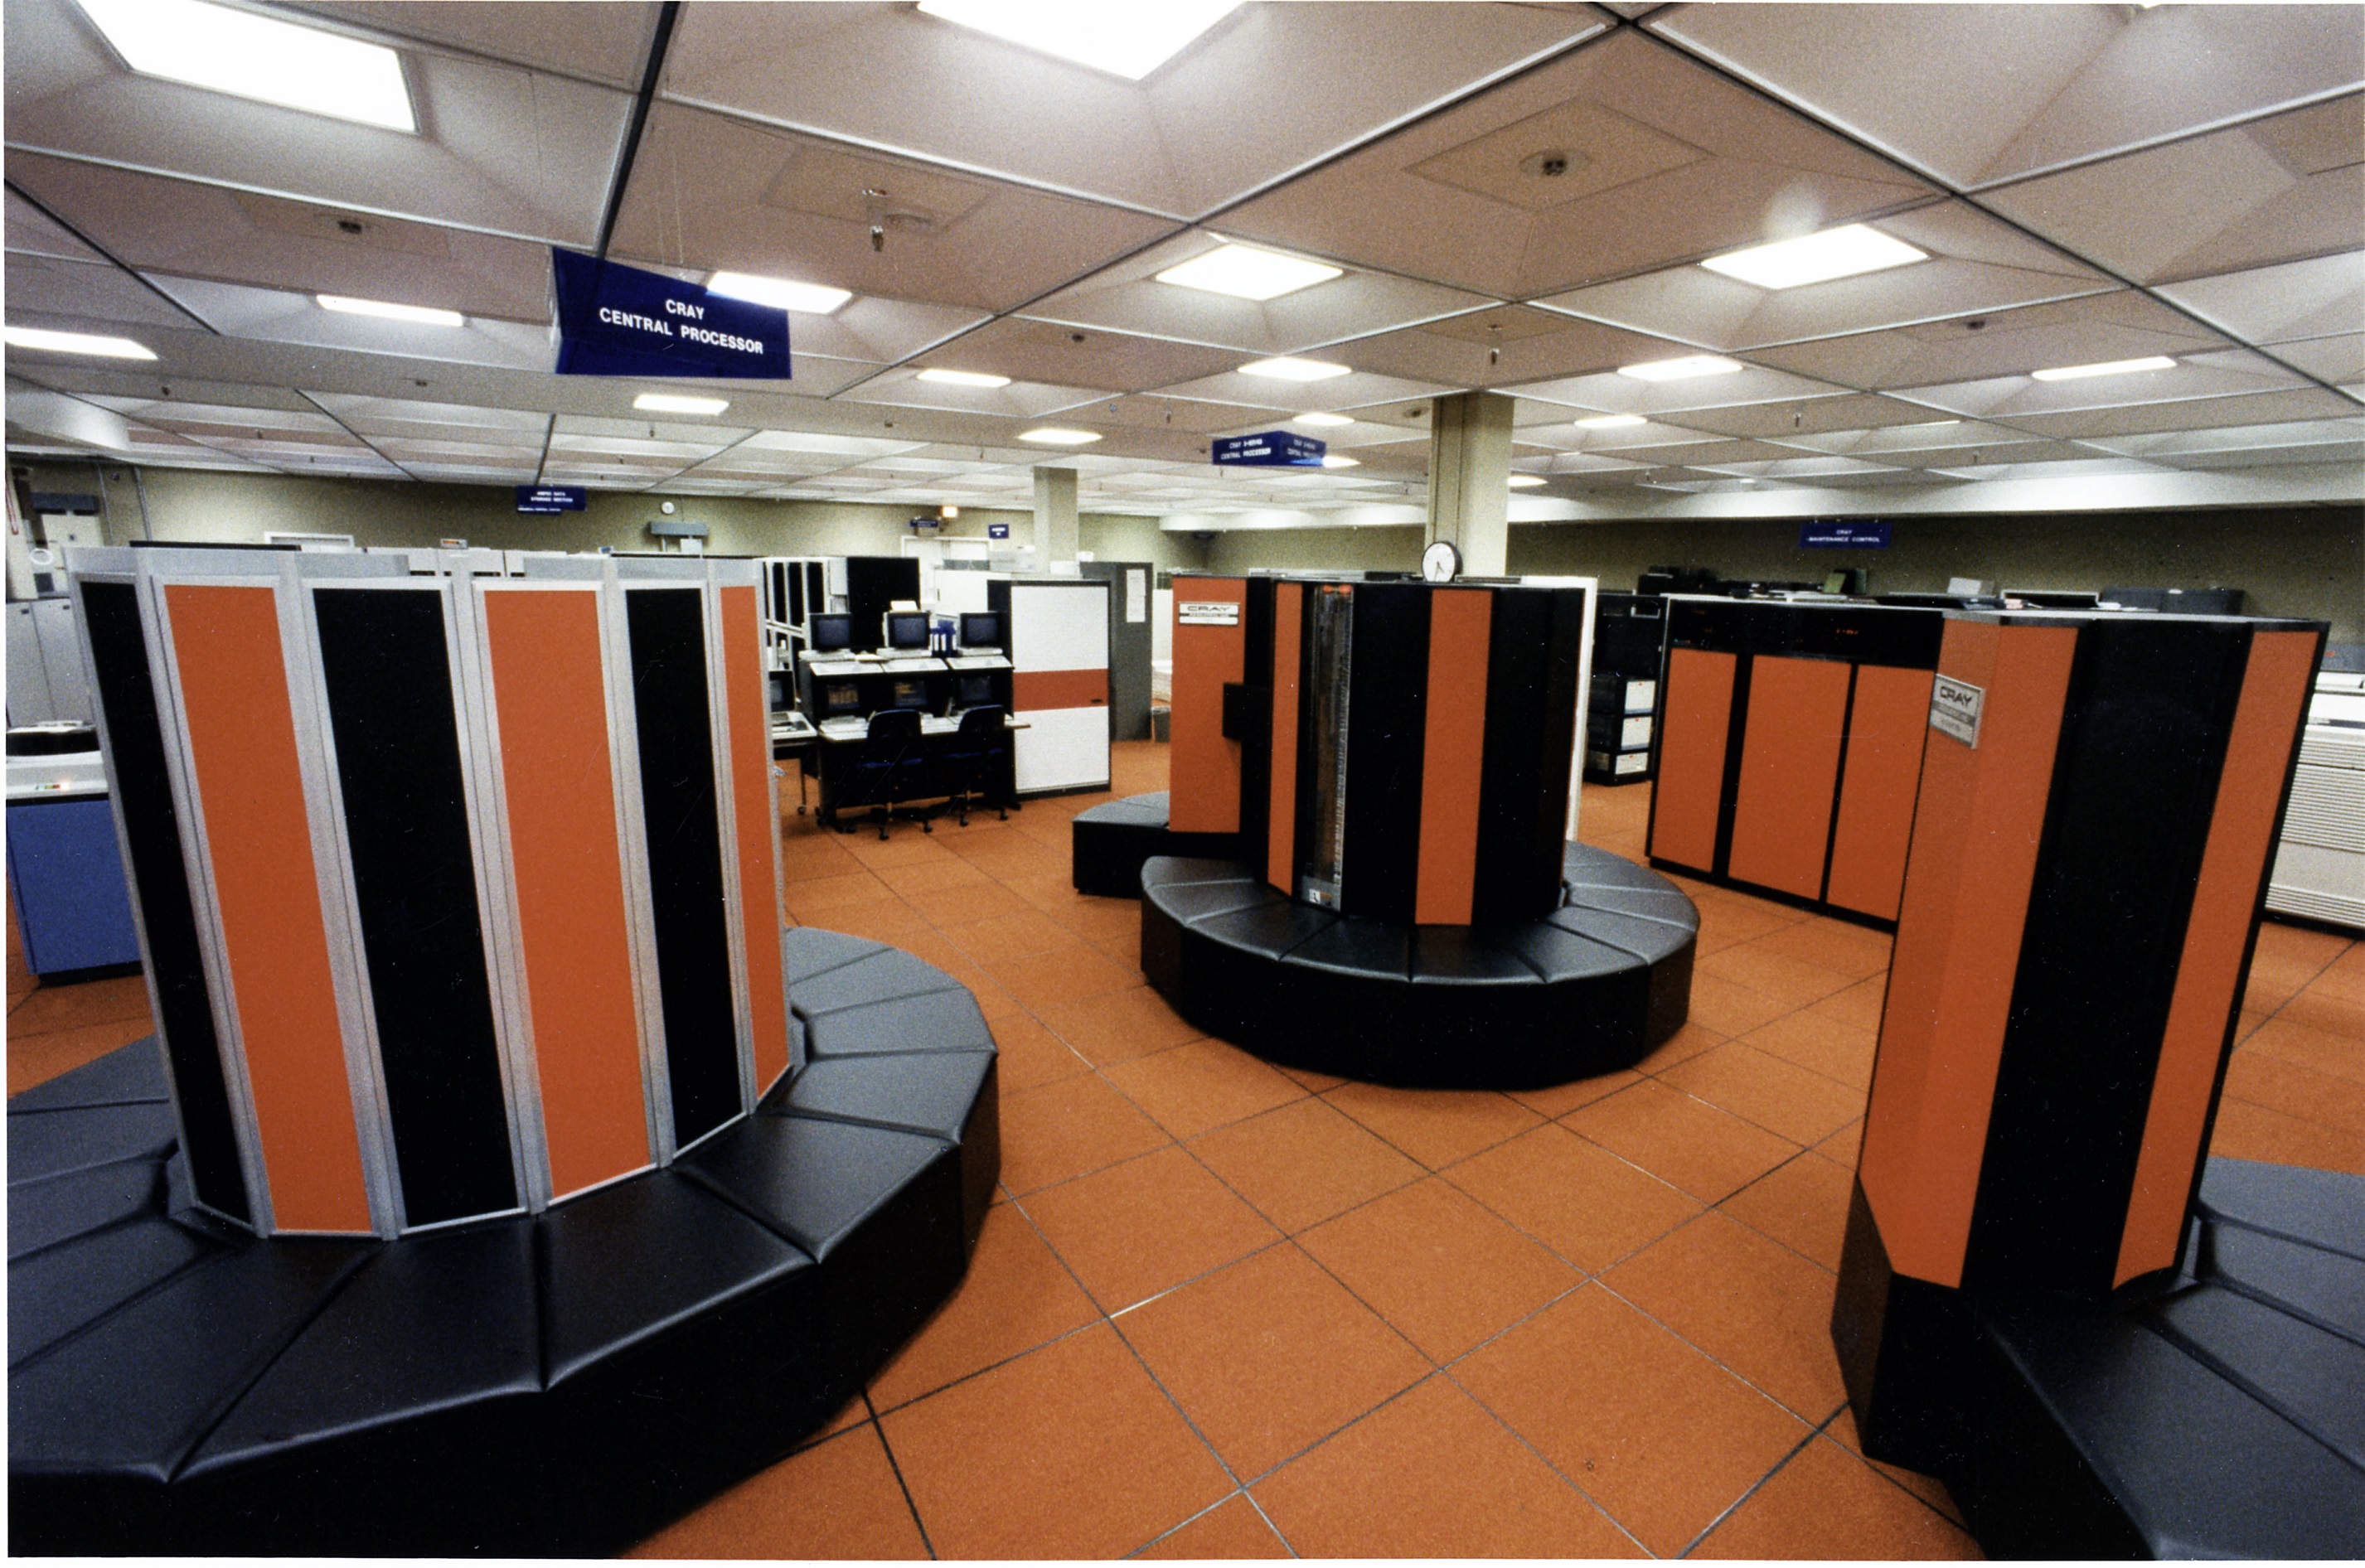 Cray supercomputer - NCAR Archives of the Cray